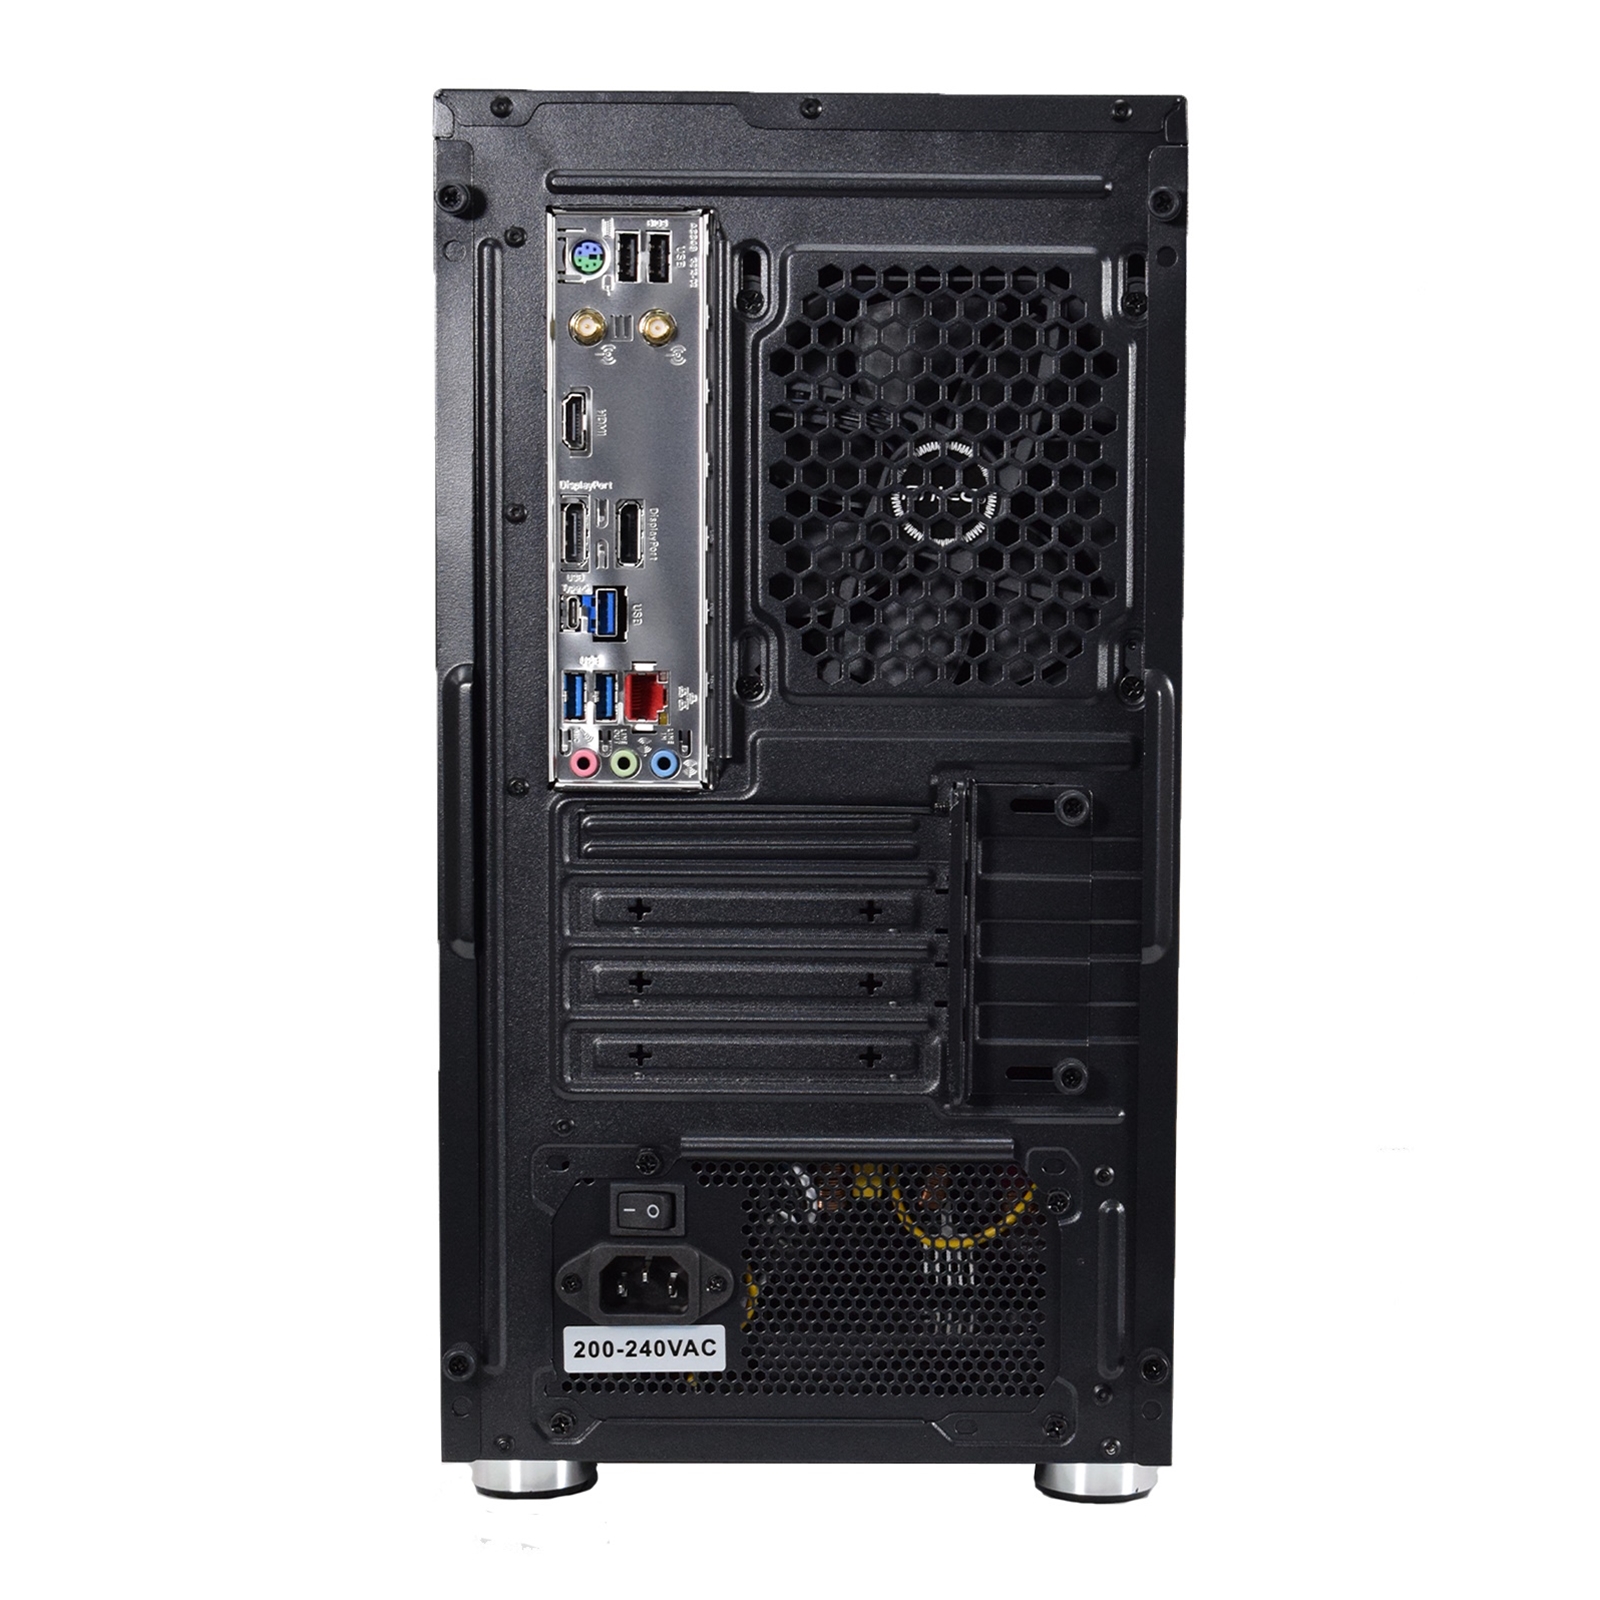 LOGIX Intel i7-12700 2.10GHz (4.90GHz Boost) 12 Core 20 threads. 16GB Kingston RAM, 1TB Kingston NVMe, Wi-Fi 6, Windows 11 Home + FREE Keyboard & Mouse - Full 3-Year Parts & Collection Warranty